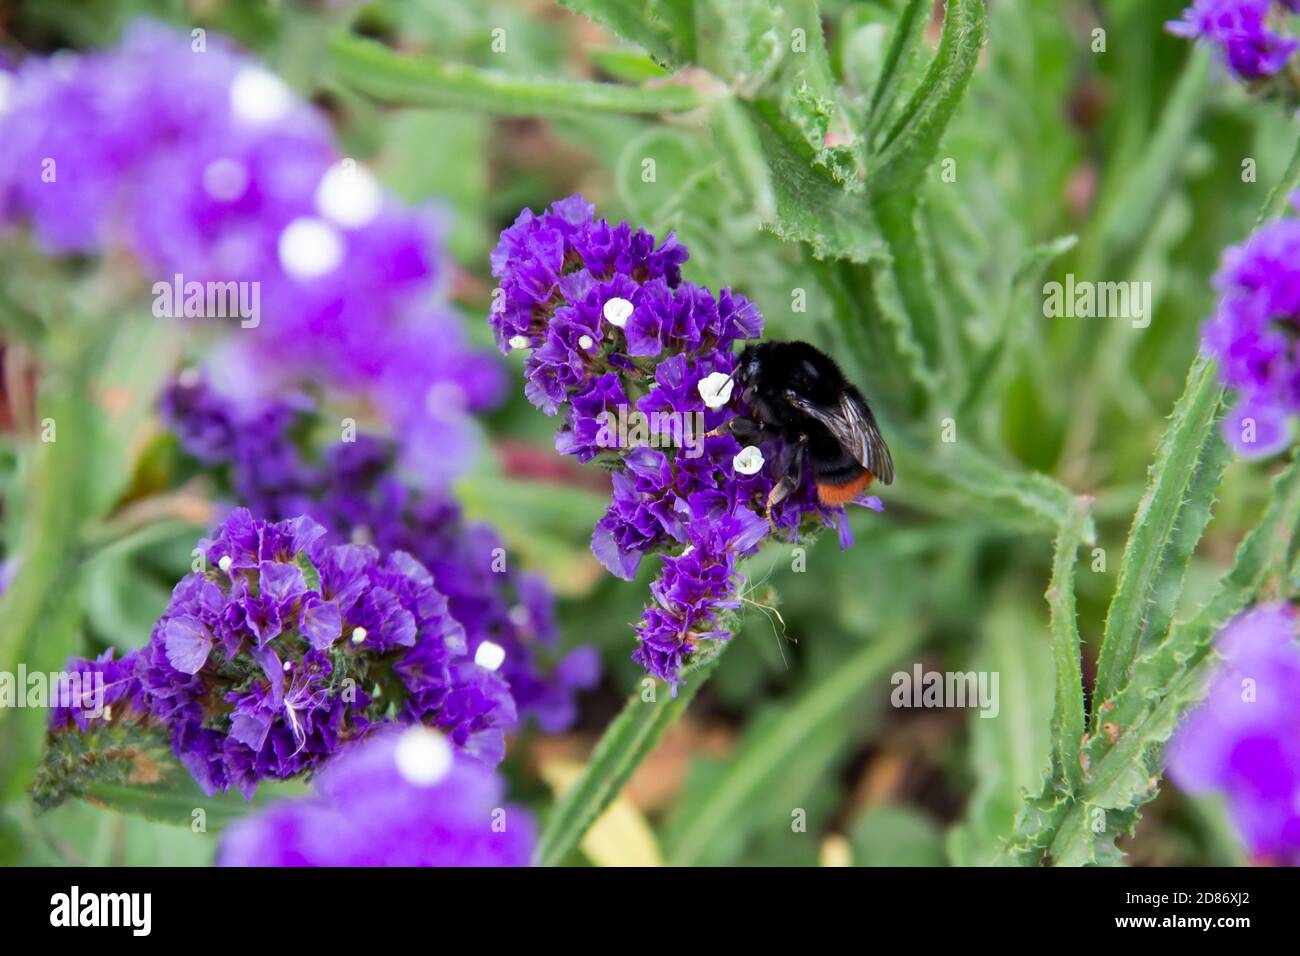 Beautiful flowers of Statice or Limonium sinuatum or Wavyleaf sea lavender.   Small flowers with white and violet color with bumblebee on them. Stock Photo